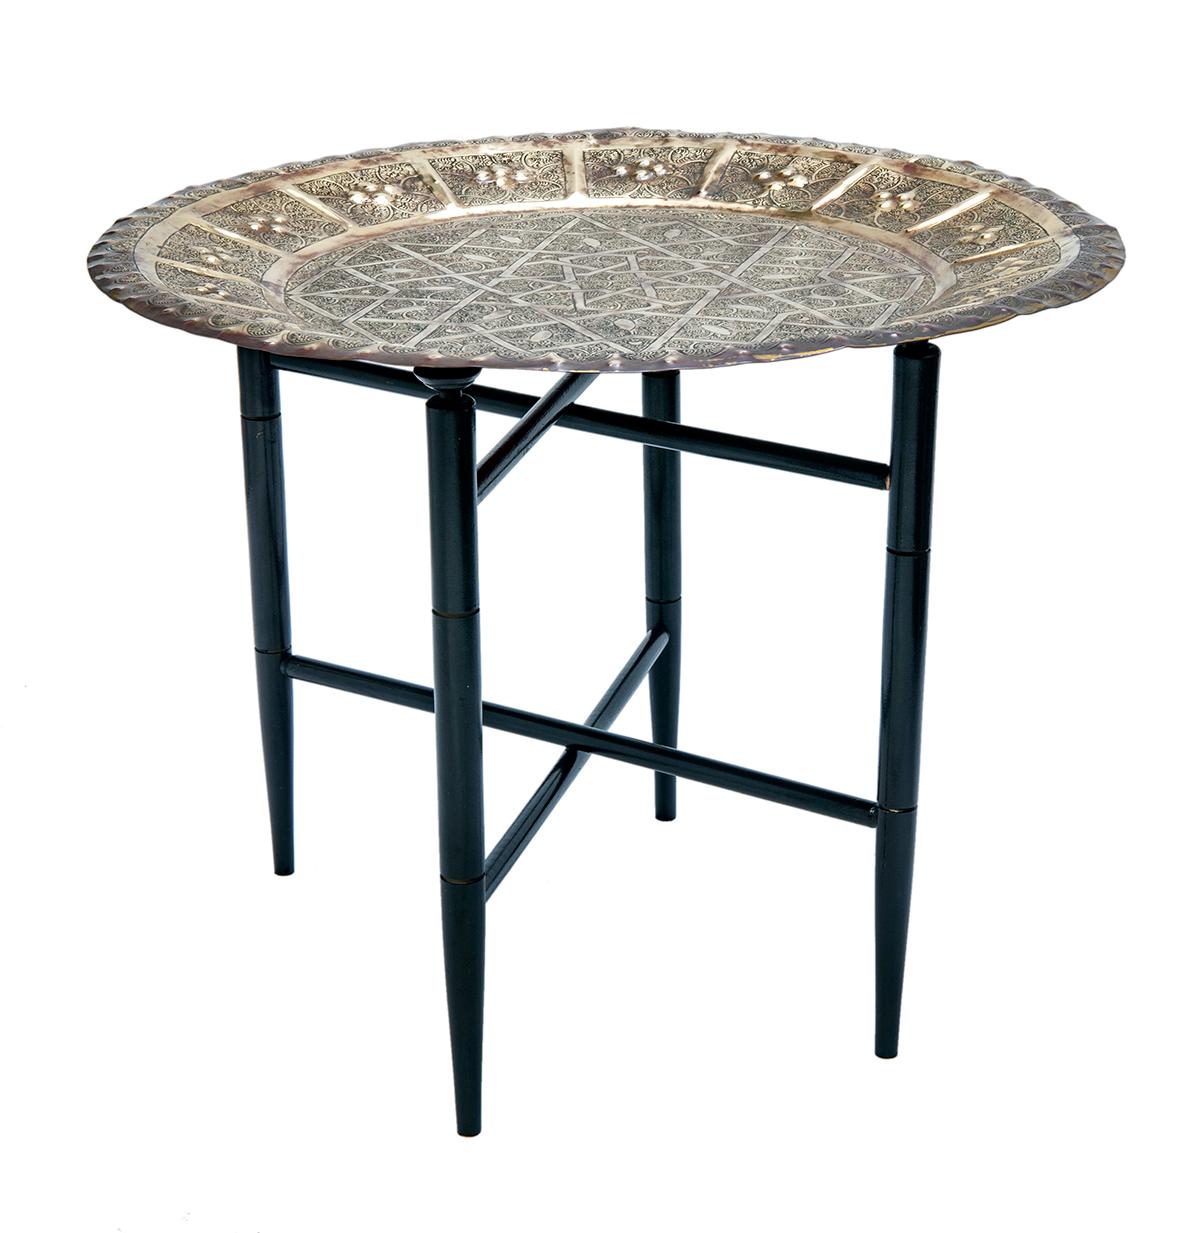 Engraved brass tray table with hand tooled brass tray top in an intricate geometric pattern. The ebony base is accented with gold. and folding teak base. Folds flat when needed.
 